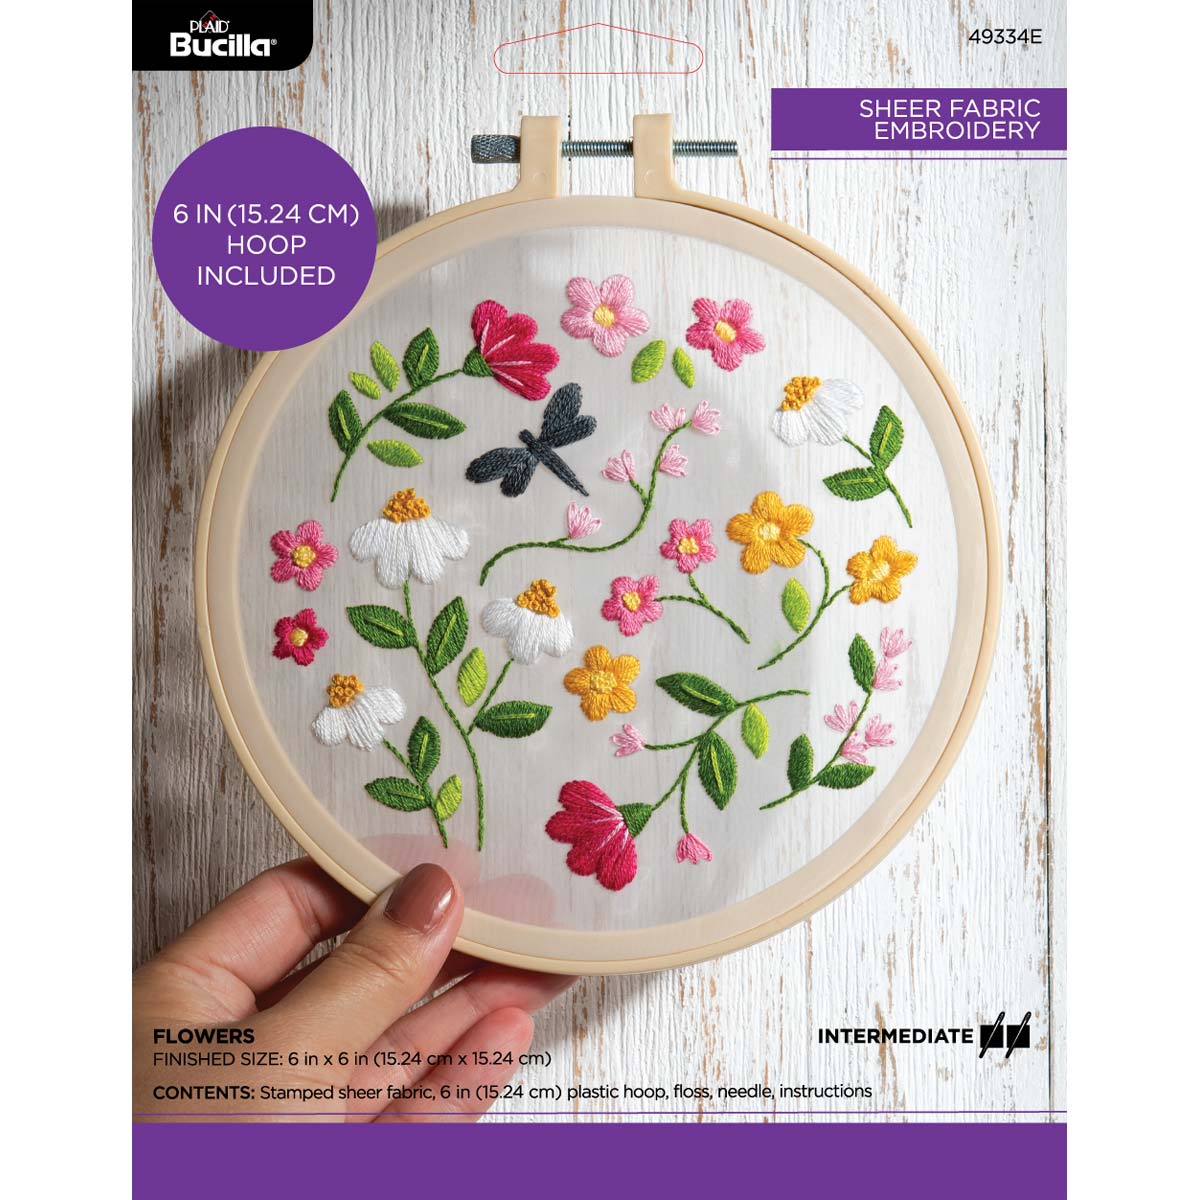 Bucilla ® Stamped Sheer Fabric Embroidery - Flowers - 49334E